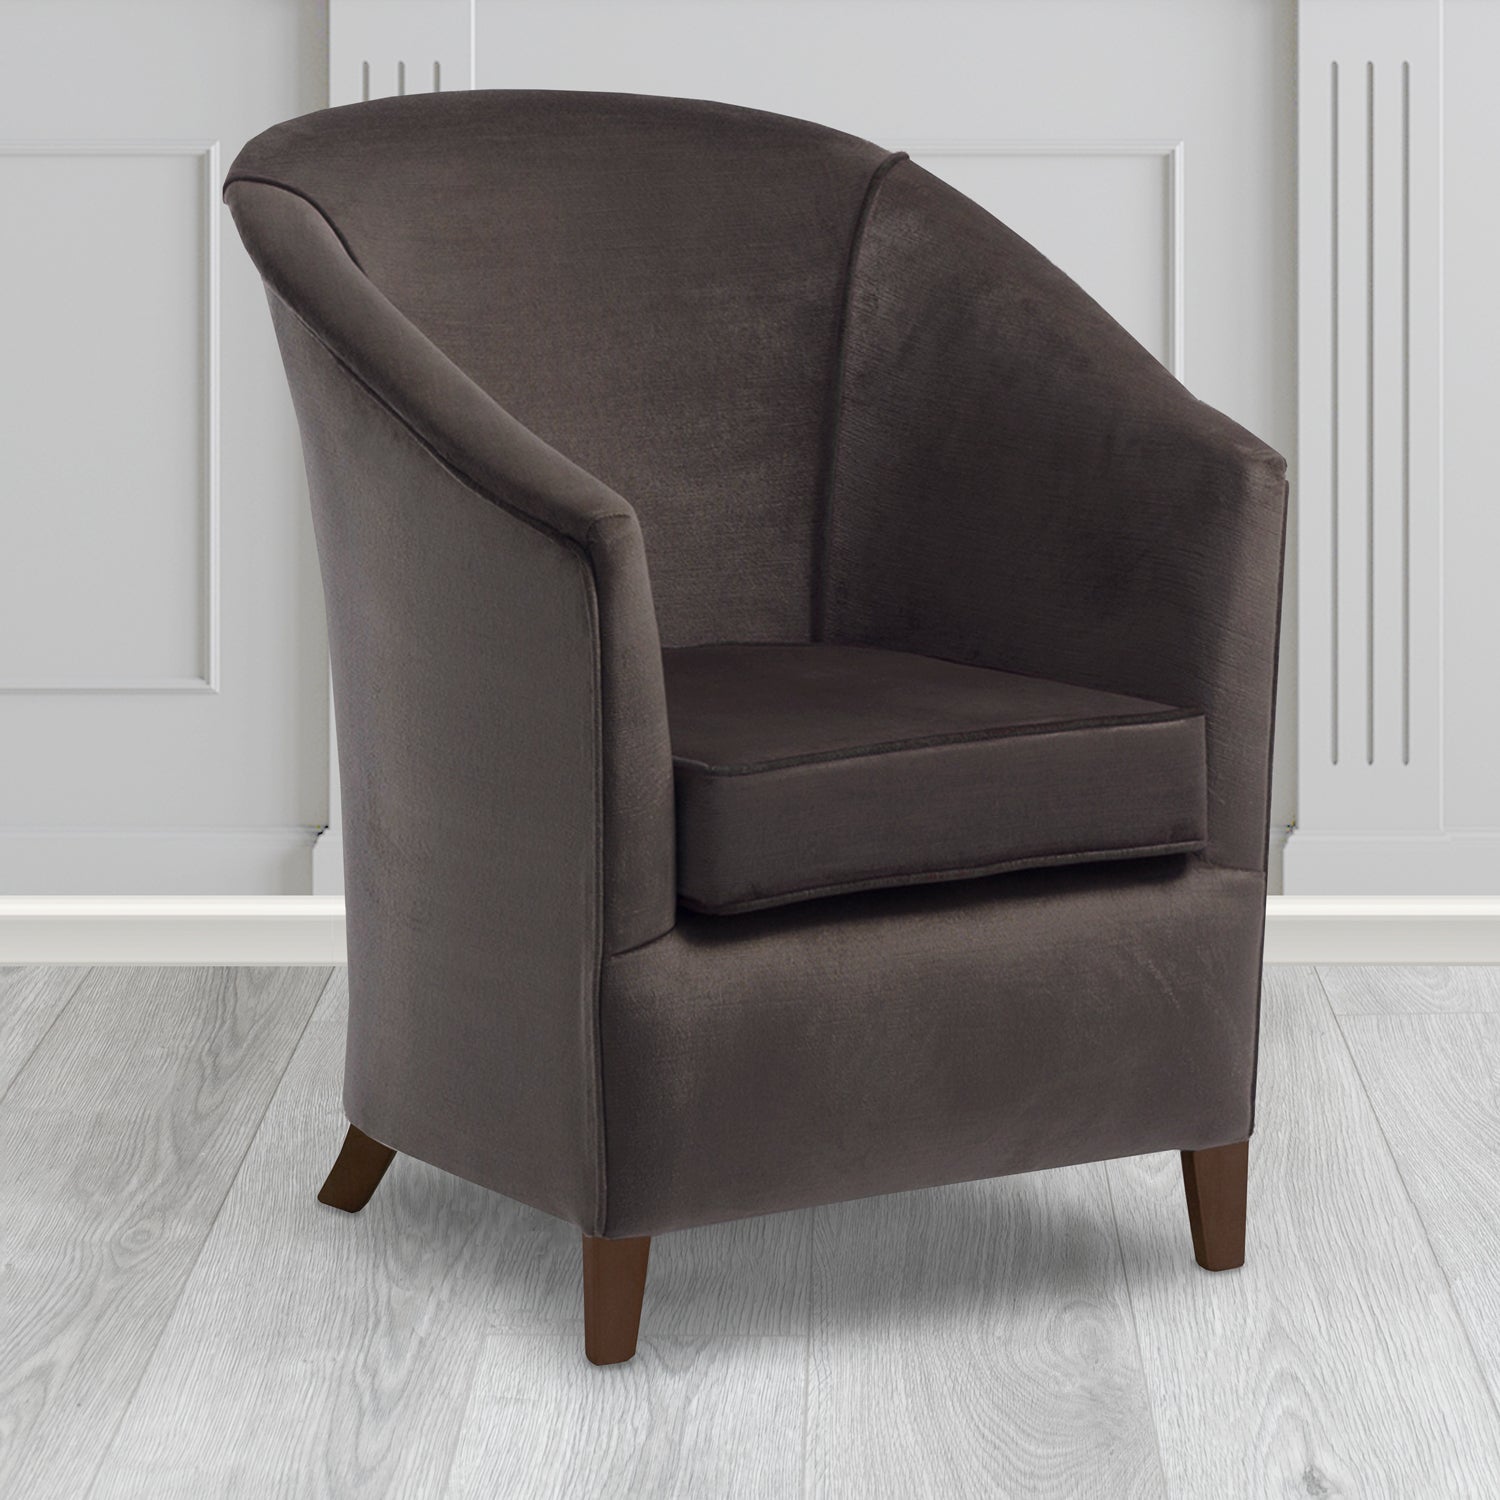 Bolton Tub Chair in Noble 903 Charcoal Crib 5 Velvet Fabric - Water Resistant - The Tub Chair Shop